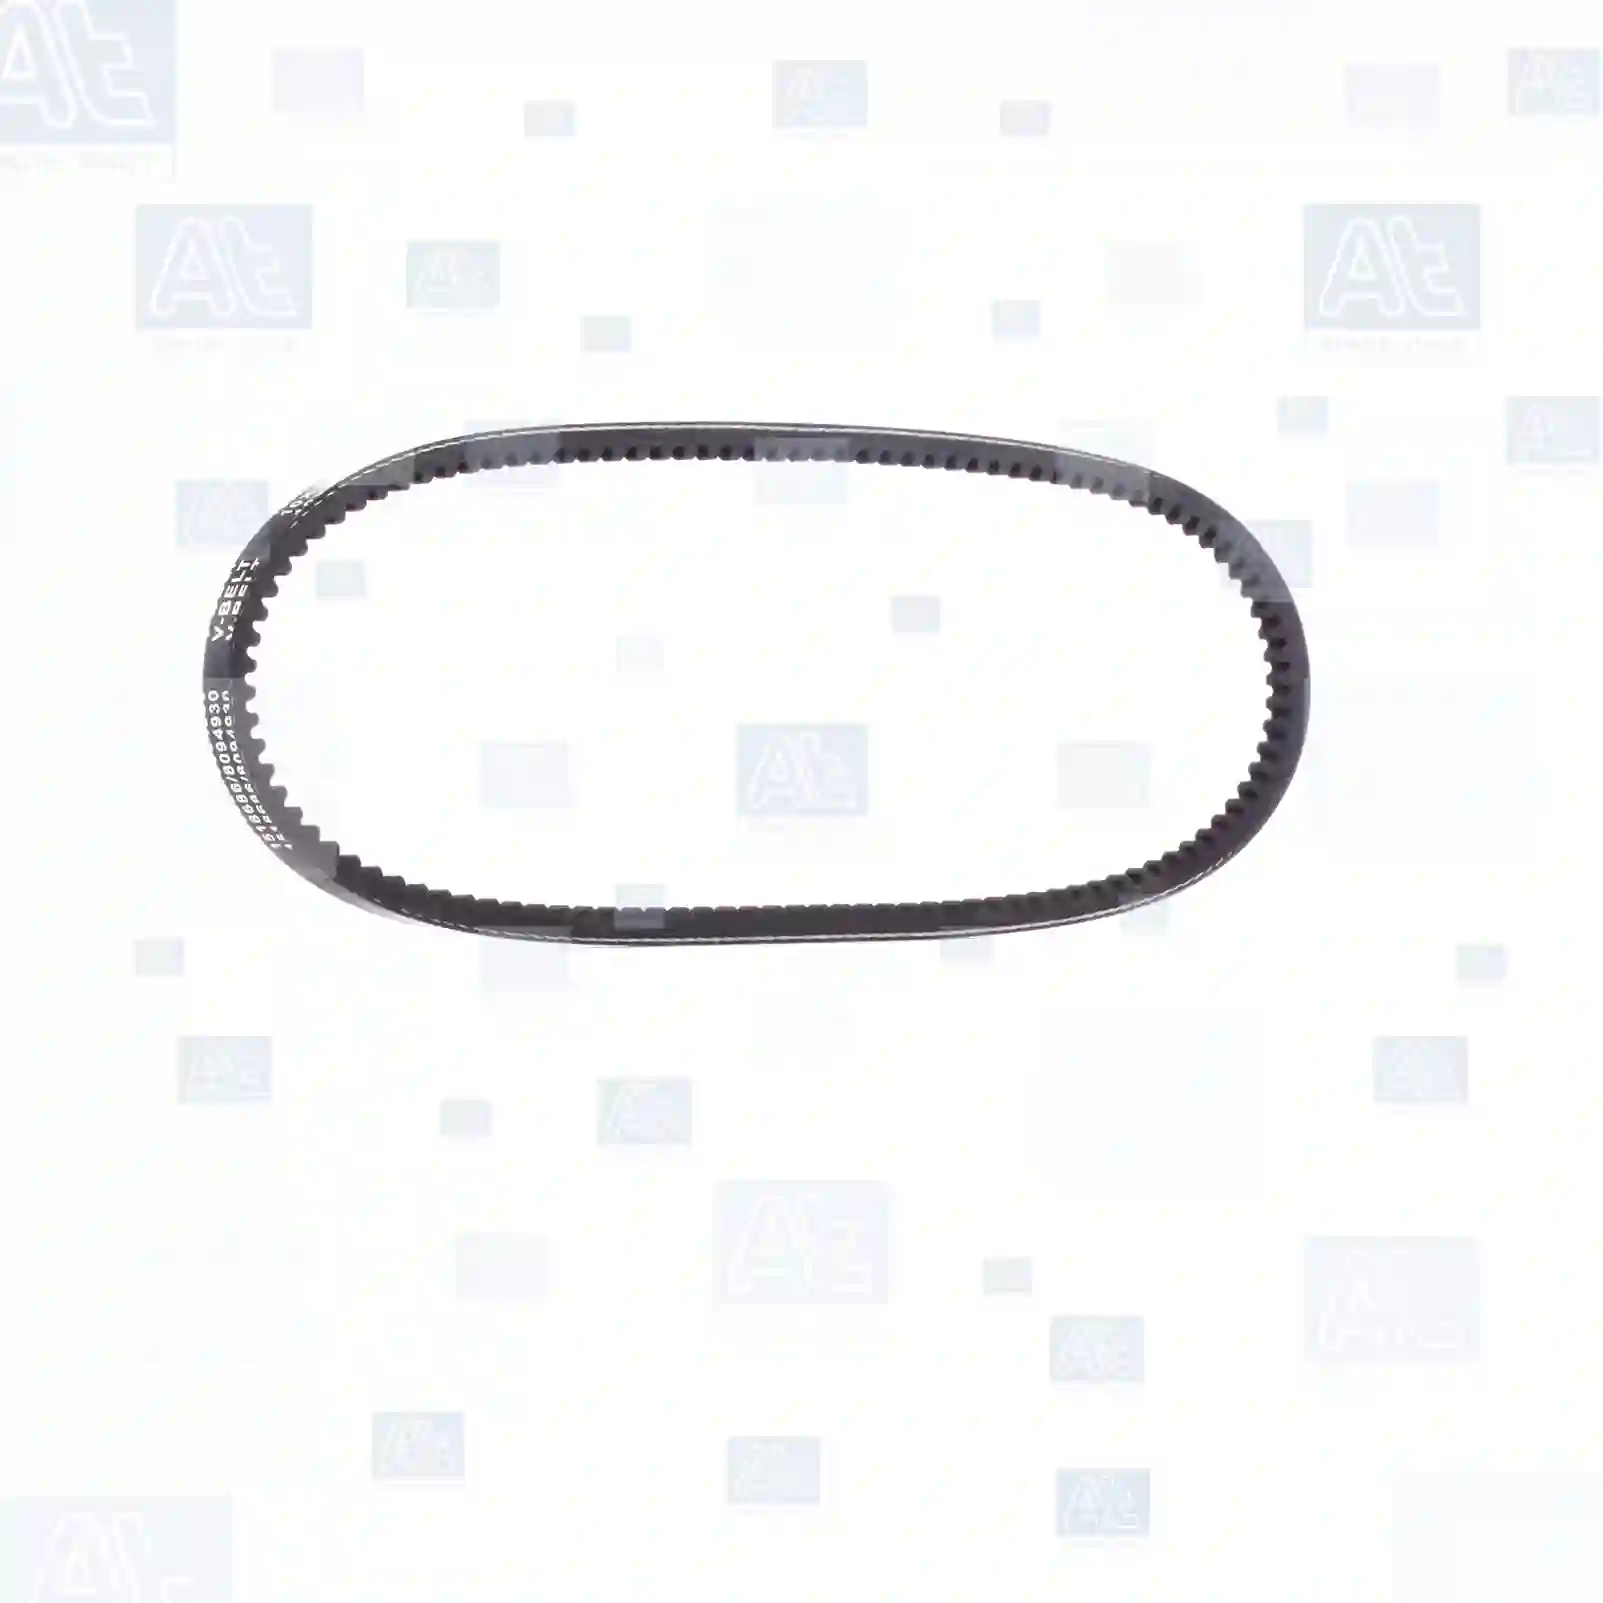 V-belt, at no 77707501, oem no: 1040002103, 021131615A, 068903137AM, 068903137AP, ADU8912, CAM9989, ETC4266, GCB10706, GCB10715, GFB10706, GFB10725, GFB260, GFB362, 23223048, 055356, 222022, 575073, 5750F6, 5750ST, 007027, 3040481, 222022, 9004832126, 9004832126000, 04070393, 04385150, 04503472, 04511850, 07302819, 07610476, 7302819, 9153633880, 91536338, 1631113, 5026967, 6158759, 21083701720, 2108370172001, 3701720, 04385150, 04503472, 04511850, 07302819, 07610476, AY0215908, 1040002103, ADU8912, CAM9989, ETC4266, GCB10706, GCB10715, GFB10706, GFB10725, GFB260, GFB362, MD017877, ADU8912, CAM9989, ETC4266, GCB10706, GCB10715, GFB10706, GFB10725, GFB260, GFB362, 01978-00704, 14853-23000, 14853-23001, 14853-25602, 14853-25603, 055356, 222022, 575073, 5750F6, 5750ST, 99919201350, 99919217650, 5750F6, 91536338, 7700704698, 151209EVA, ADU8912, CAM9989, ETC4266, GCB10706, GCB10715, GFB10706, GFB10725, GFB260, GFB362, 809110150, 809110330, 17521-76G01, 90861-07300, 90916-02028, 99511-10705, ADU8912, CAM9989, ETC4266, GCB10706, GCB10715, GFB10706, GFB10725, GFB260, GFB362, 950805, 021131615, 021131615A, 068903137AM, 068903137AP, 21083701720, 2108370172001 At Spare Part | Engine, Accelerator Pedal, Camshaft, Connecting Rod, Crankcase, Crankshaft, Cylinder Head, Engine Suspension Mountings, Exhaust Manifold, Exhaust Gas Recirculation, Filter Kits, Flywheel Housing, General Overhaul Kits, Engine, Intake Manifold, Oil Cleaner, Oil Cooler, Oil Filter, Oil Pump, Oil Sump, Piston & Liner, Sensor & Switch, Timing Case, Turbocharger, Cooling System, Belt Tensioner, Coolant Filter, Coolant Pipe, Corrosion Prevention Agent, Drive, Expansion Tank, Fan, Intercooler, Monitors & Gauges, Radiator, Thermostat, V-Belt / Timing belt, Water Pump, Fuel System, Electronical Injector Unit, Feed Pump, Fuel Filter, cpl., Fuel Gauge Sender,  Fuel Line, Fuel Pump, Fuel Tank, Injection Line Kit, Injection Pump, Exhaust System, Clutch & Pedal, Gearbox, Propeller Shaft, Axles, Brake System, Hubs & Wheels, Suspension, Leaf Spring, Universal Parts / Accessories, Steering, Electrical System, Cabin V-belt, at no 77707501, oem no: 1040002103, 021131615A, 068903137AM, 068903137AP, ADU8912, CAM9989, ETC4266, GCB10706, GCB10715, GFB10706, GFB10725, GFB260, GFB362, 23223048, 055356, 222022, 575073, 5750F6, 5750ST, 007027, 3040481, 222022, 9004832126, 9004832126000, 04070393, 04385150, 04503472, 04511850, 07302819, 07610476, 7302819, 9153633880, 91536338, 1631113, 5026967, 6158759, 21083701720, 2108370172001, 3701720, 04385150, 04503472, 04511850, 07302819, 07610476, AY0215908, 1040002103, ADU8912, CAM9989, ETC4266, GCB10706, GCB10715, GFB10706, GFB10725, GFB260, GFB362, MD017877, ADU8912, CAM9989, ETC4266, GCB10706, GCB10715, GFB10706, GFB10725, GFB260, GFB362, 01978-00704, 14853-23000, 14853-23001, 14853-25602, 14853-25603, 055356, 222022, 575073, 5750F6, 5750ST, 99919201350, 99919217650, 5750F6, 91536338, 7700704698, 151209EVA, ADU8912, CAM9989, ETC4266, GCB10706, GCB10715, GFB10706, GFB10725, GFB260, GFB362, 809110150, 809110330, 17521-76G01, 90861-07300, 90916-02028, 99511-10705, ADU8912, CAM9989, ETC4266, GCB10706, GCB10715, GFB10706, GFB10725, GFB260, GFB362, 950805, 021131615, 021131615A, 068903137AM, 068903137AP, 21083701720, 2108370172001 At Spare Part | Engine, Accelerator Pedal, Camshaft, Connecting Rod, Crankcase, Crankshaft, Cylinder Head, Engine Suspension Mountings, Exhaust Manifold, Exhaust Gas Recirculation, Filter Kits, Flywheel Housing, General Overhaul Kits, Engine, Intake Manifold, Oil Cleaner, Oil Cooler, Oil Filter, Oil Pump, Oil Sump, Piston & Liner, Sensor & Switch, Timing Case, Turbocharger, Cooling System, Belt Tensioner, Coolant Filter, Coolant Pipe, Corrosion Prevention Agent, Drive, Expansion Tank, Fan, Intercooler, Monitors & Gauges, Radiator, Thermostat, V-Belt / Timing belt, Water Pump, Fuel System, Electronical Injector Unit, Feed Pump, Fuel Filter, cpl., Fuel Gauge Sender,  Fuel Line, Fuel Pump, Fuel Tank, Injection Line Kit, Injection Pump, Exhaust System, Clutch & Pedal, Gearbox, Propeller Shaft, Axles, Brake System, Hubs & Wheels, Suspension, Leaf Spring, Universal Parts / Accessories, Steering, Electrical System, Cabin